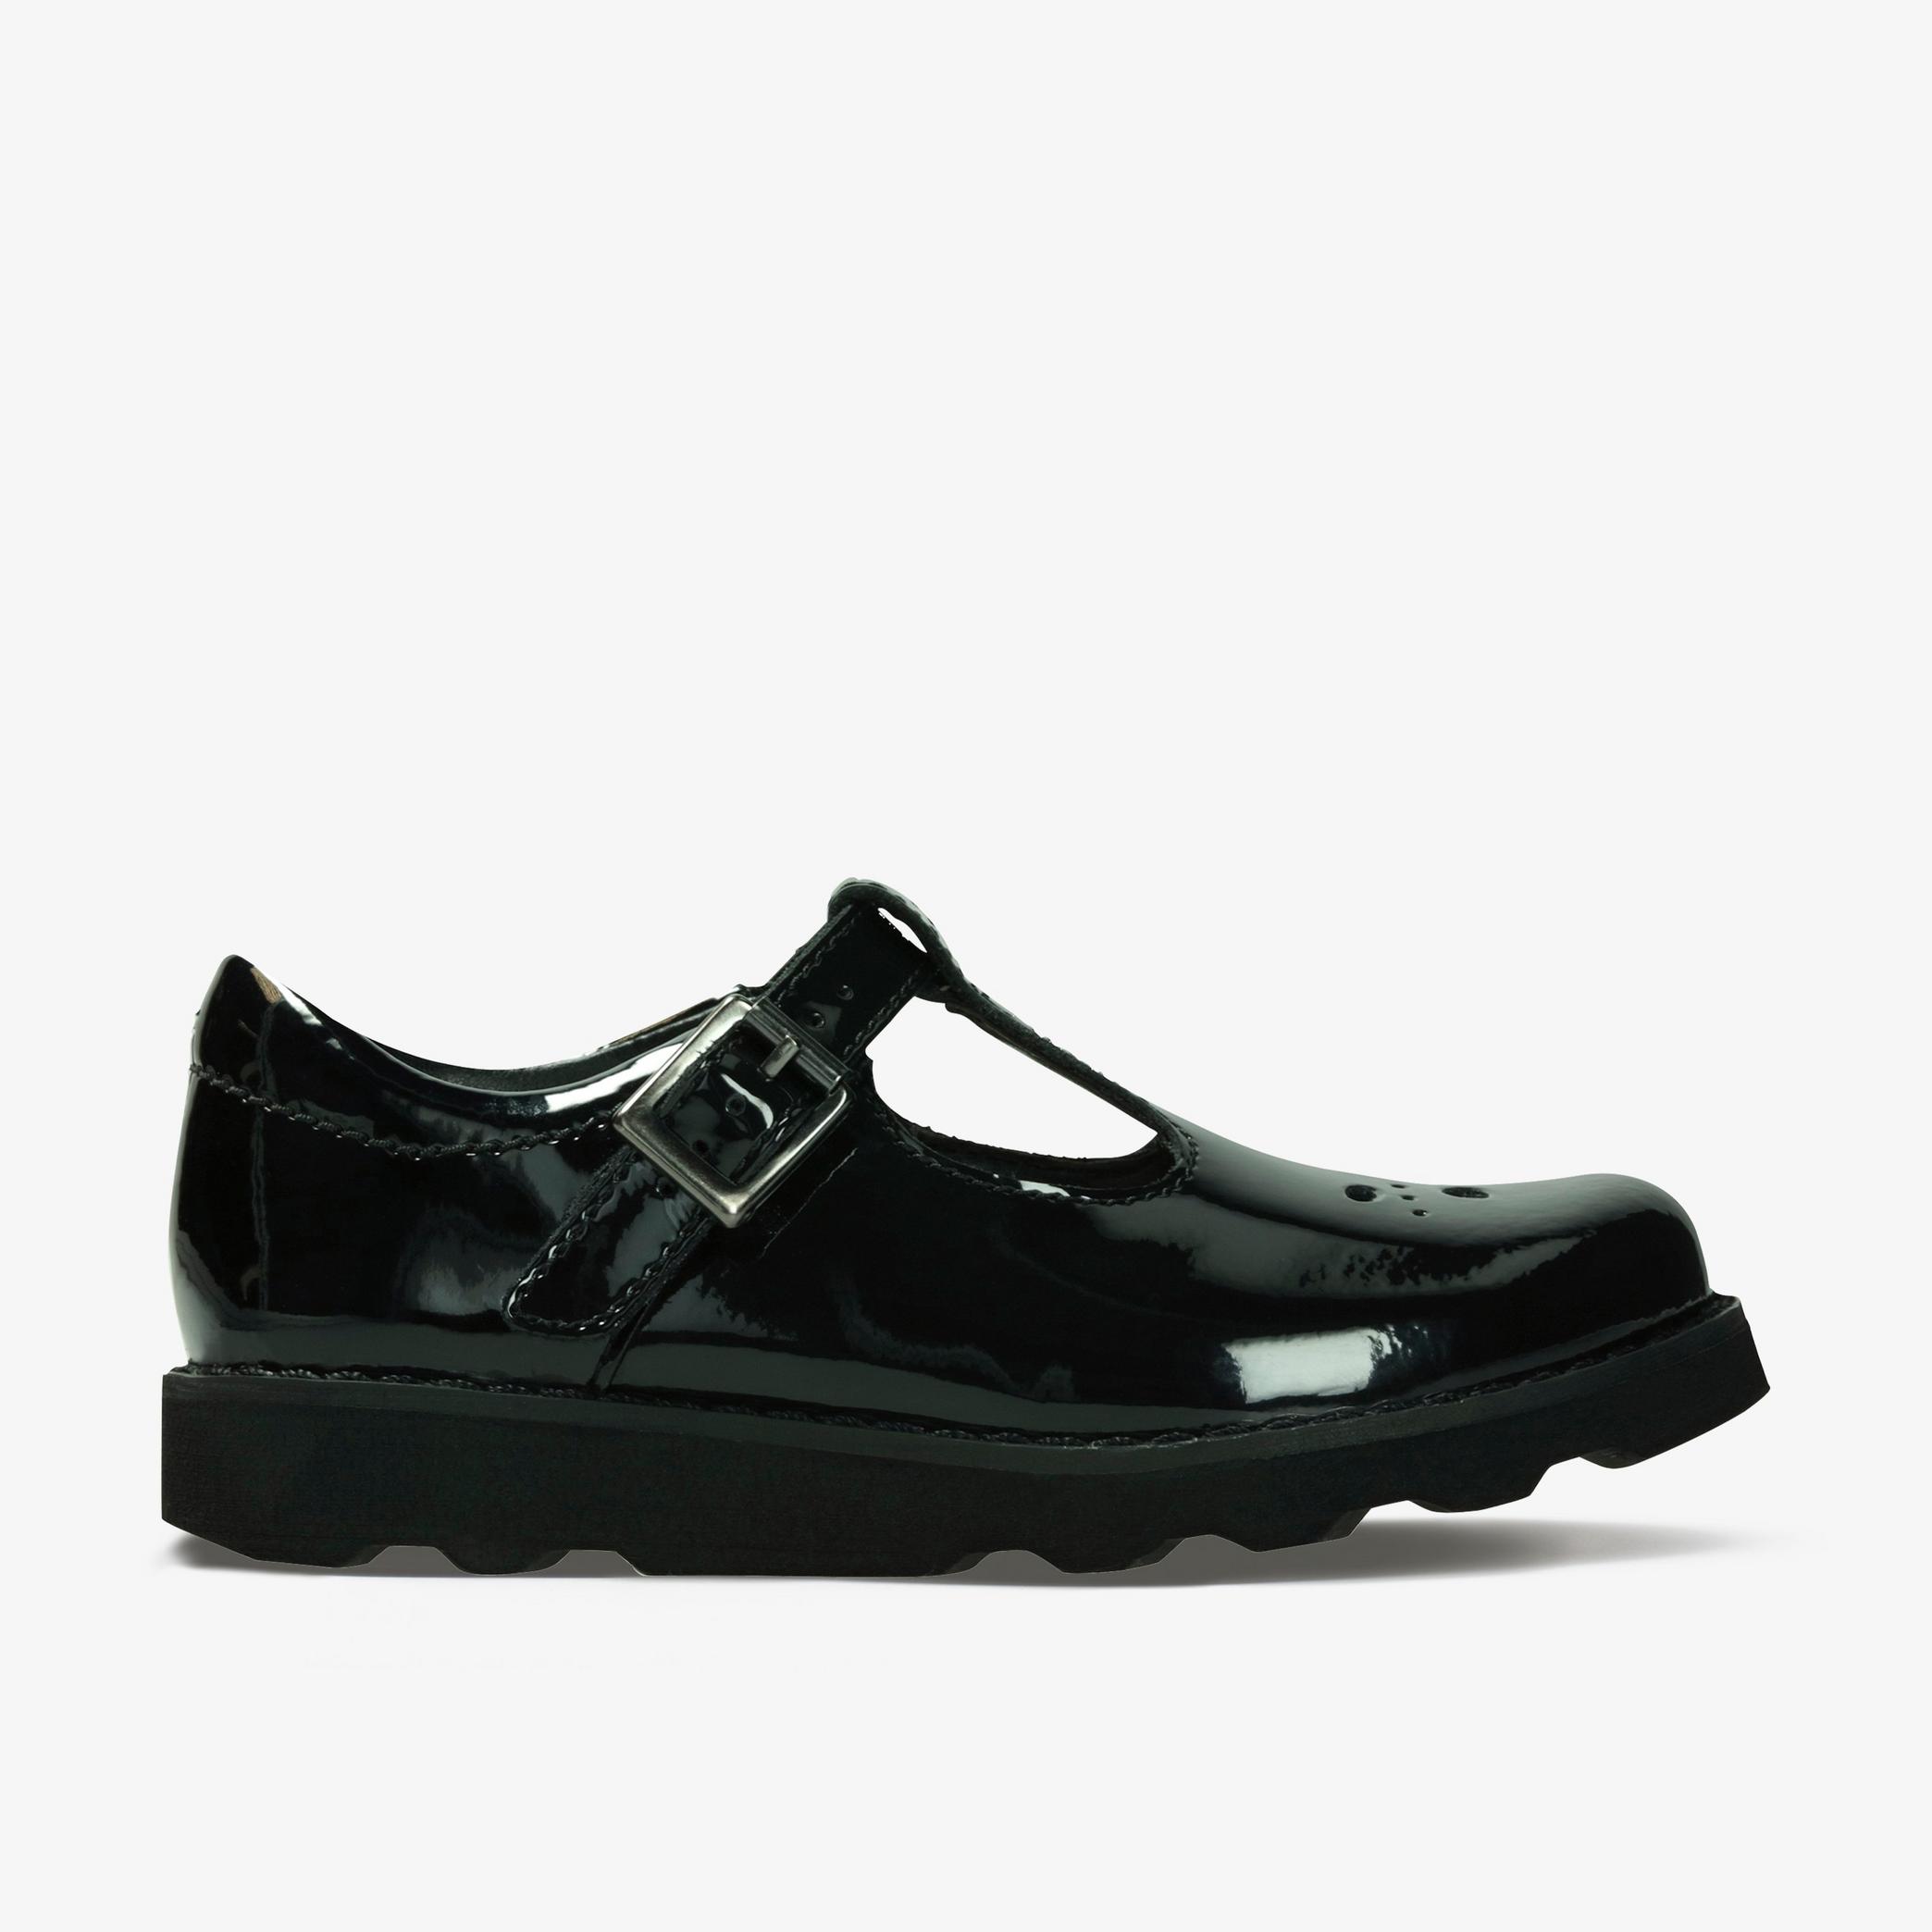 GIRLS Crown Wish Kid Black Patent T Bar Shoes | Clarks Outlet